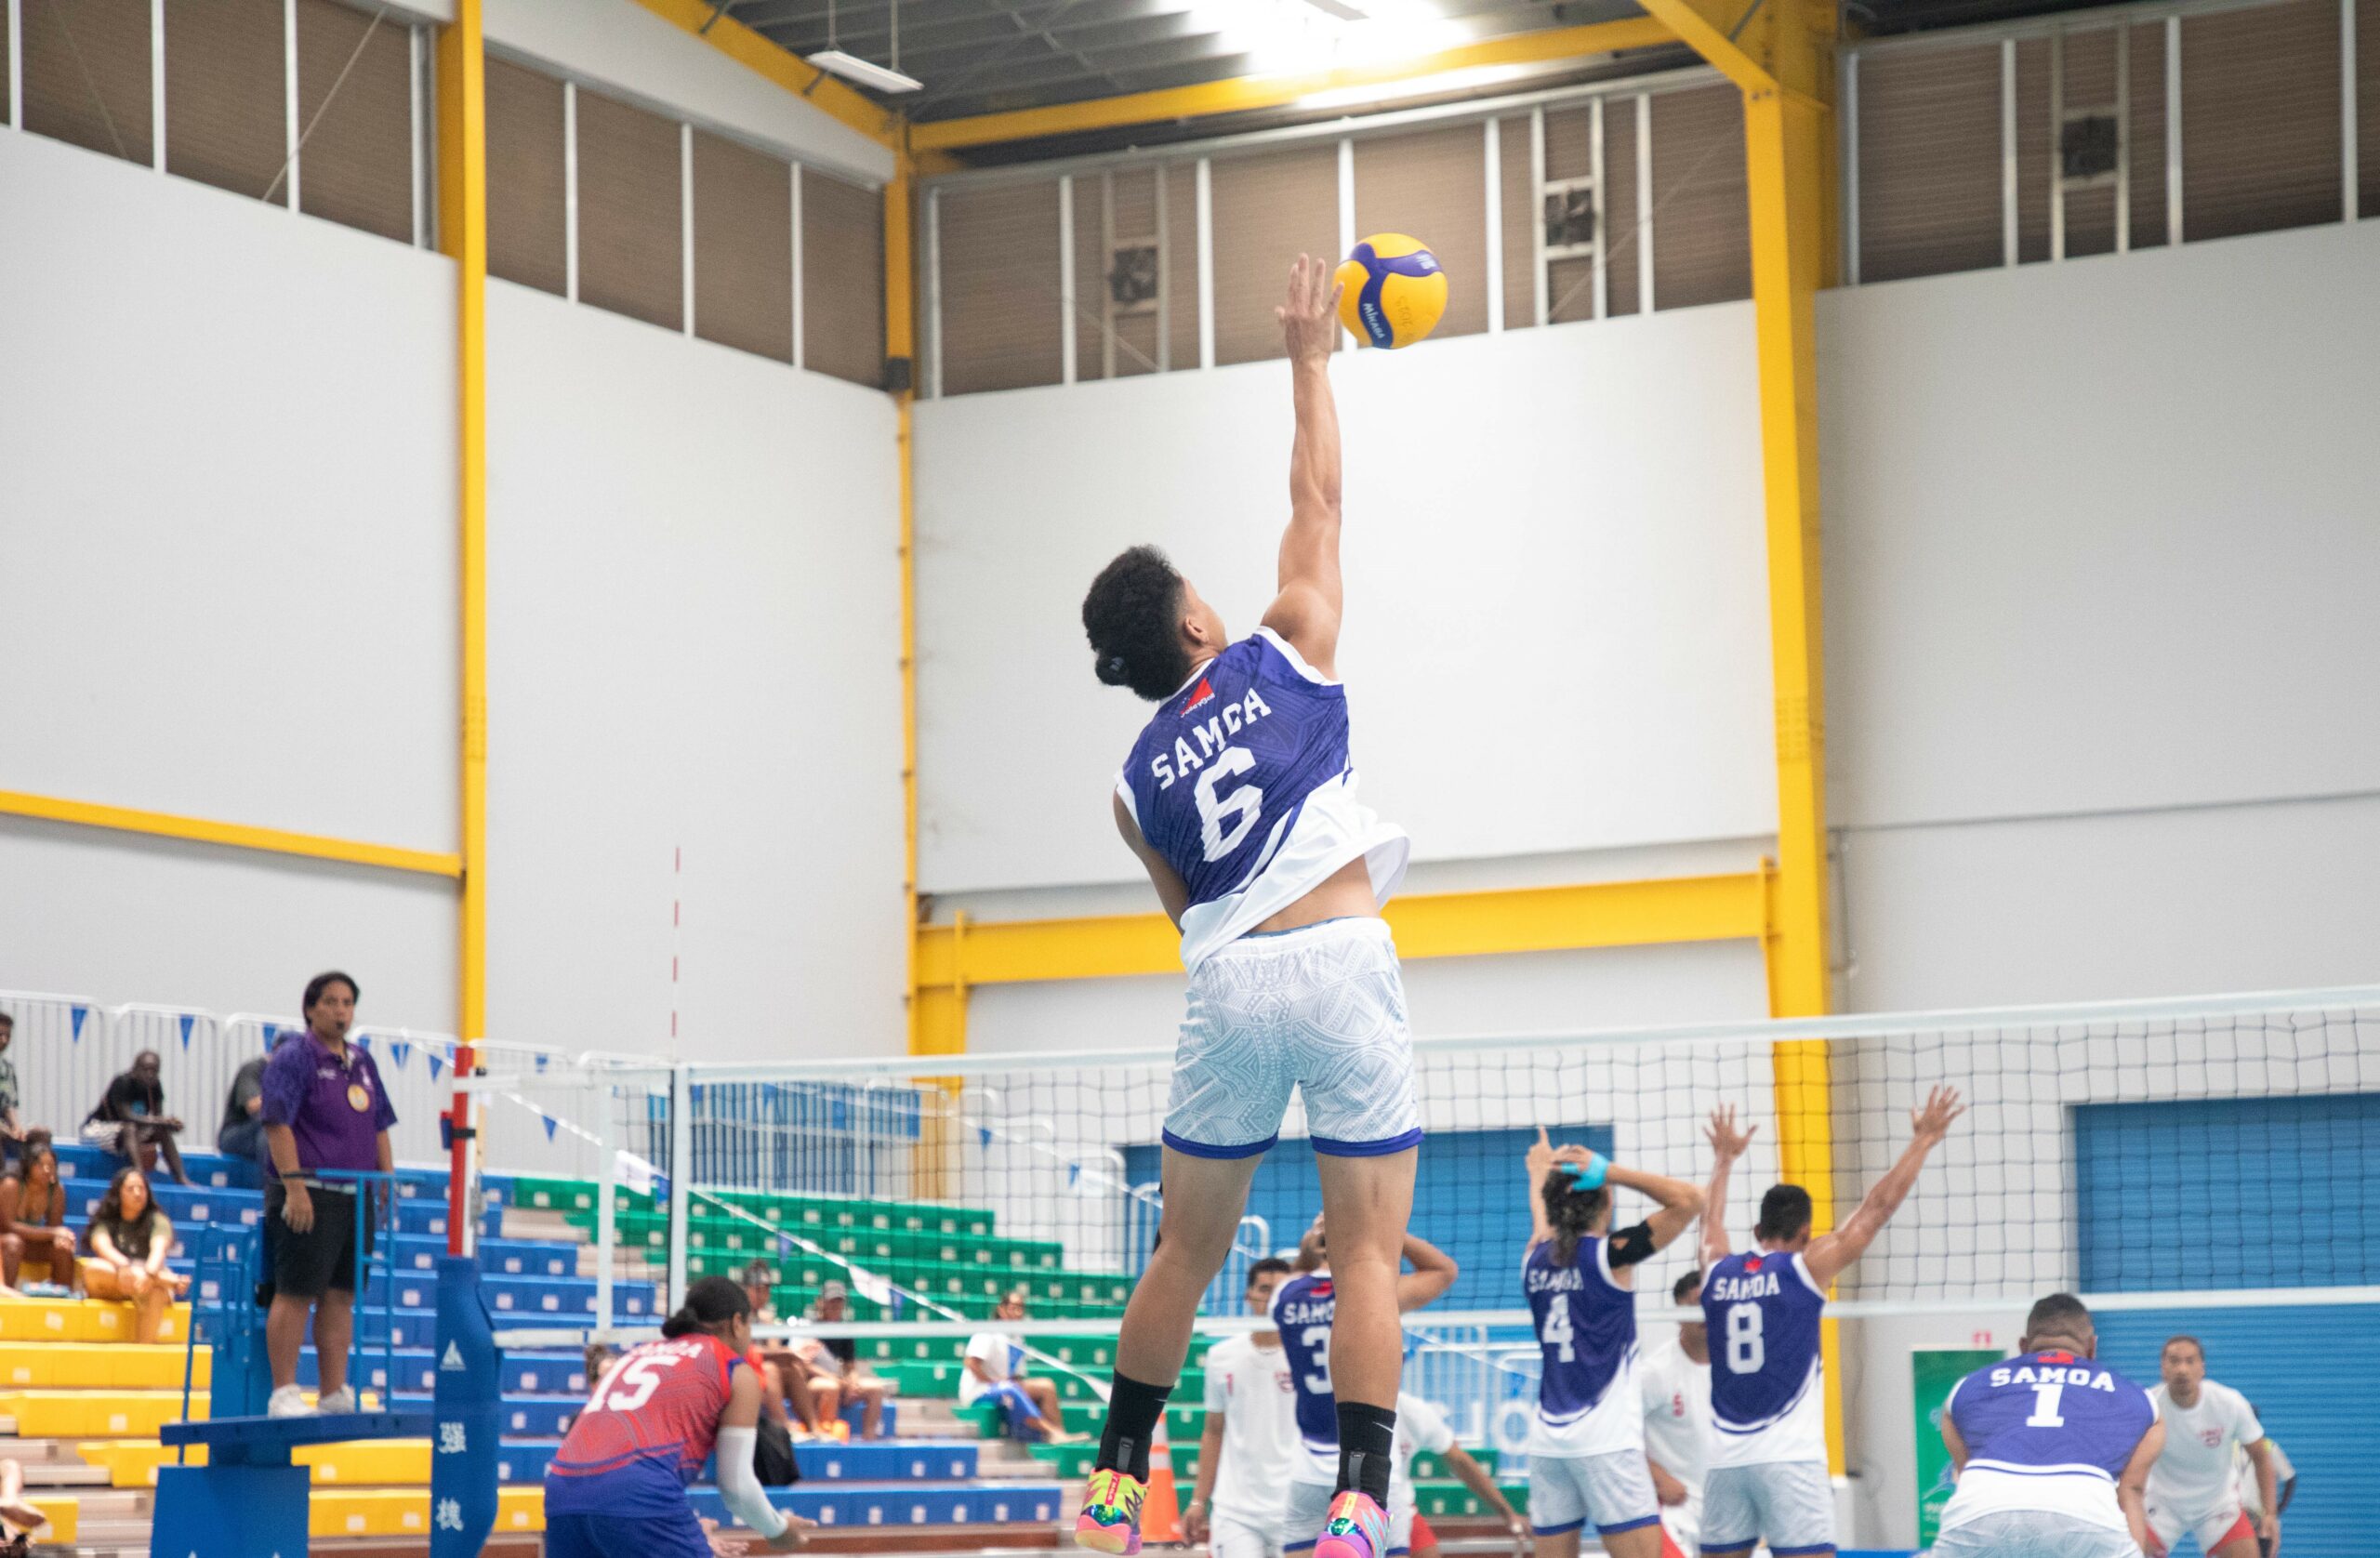 A man playing volleyball